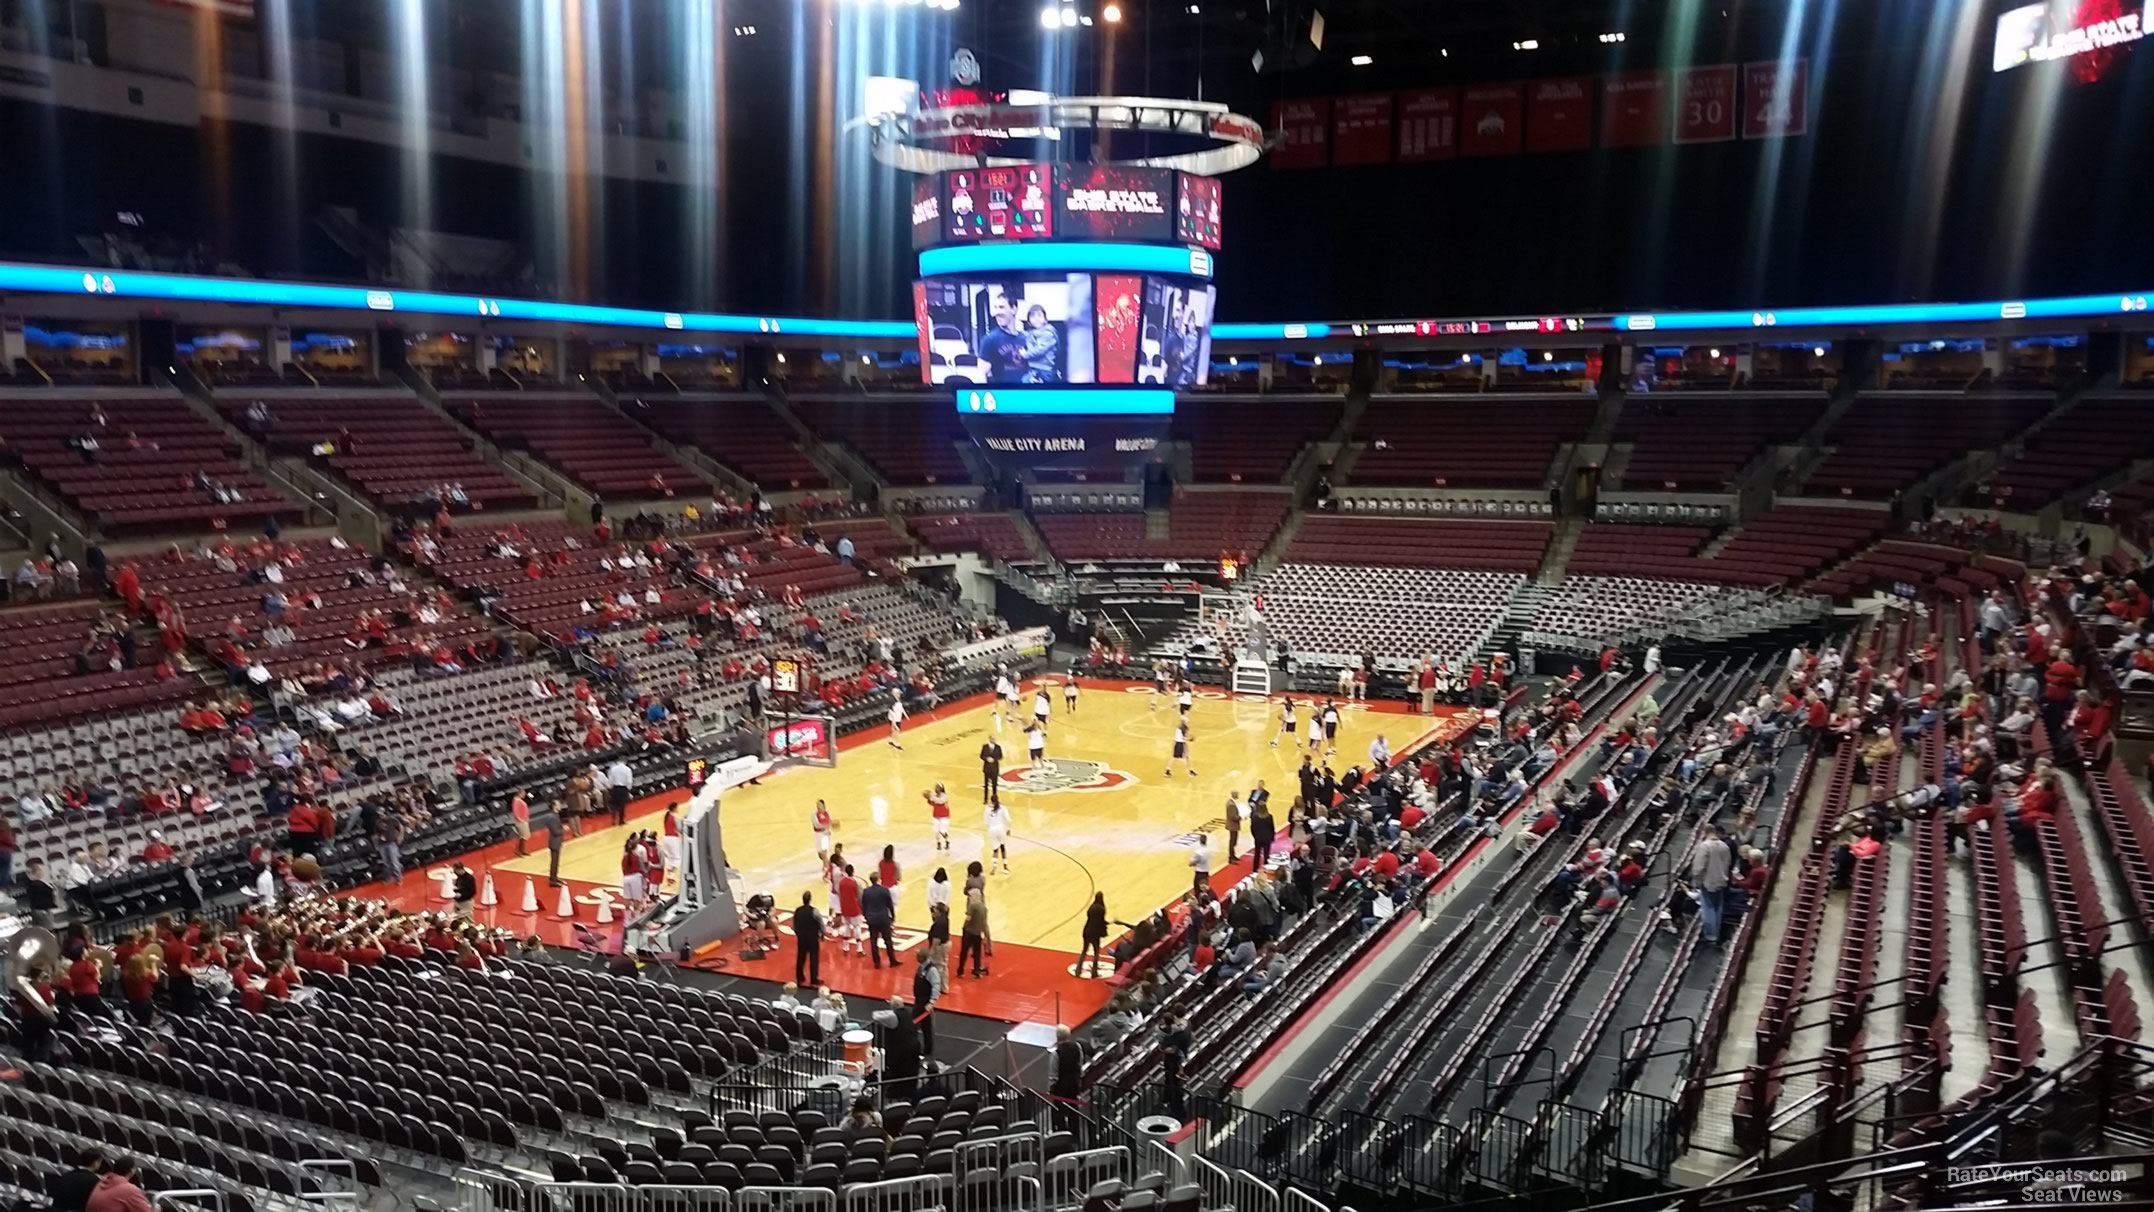 section 211, row h seat view  for basketball - schottenstein center